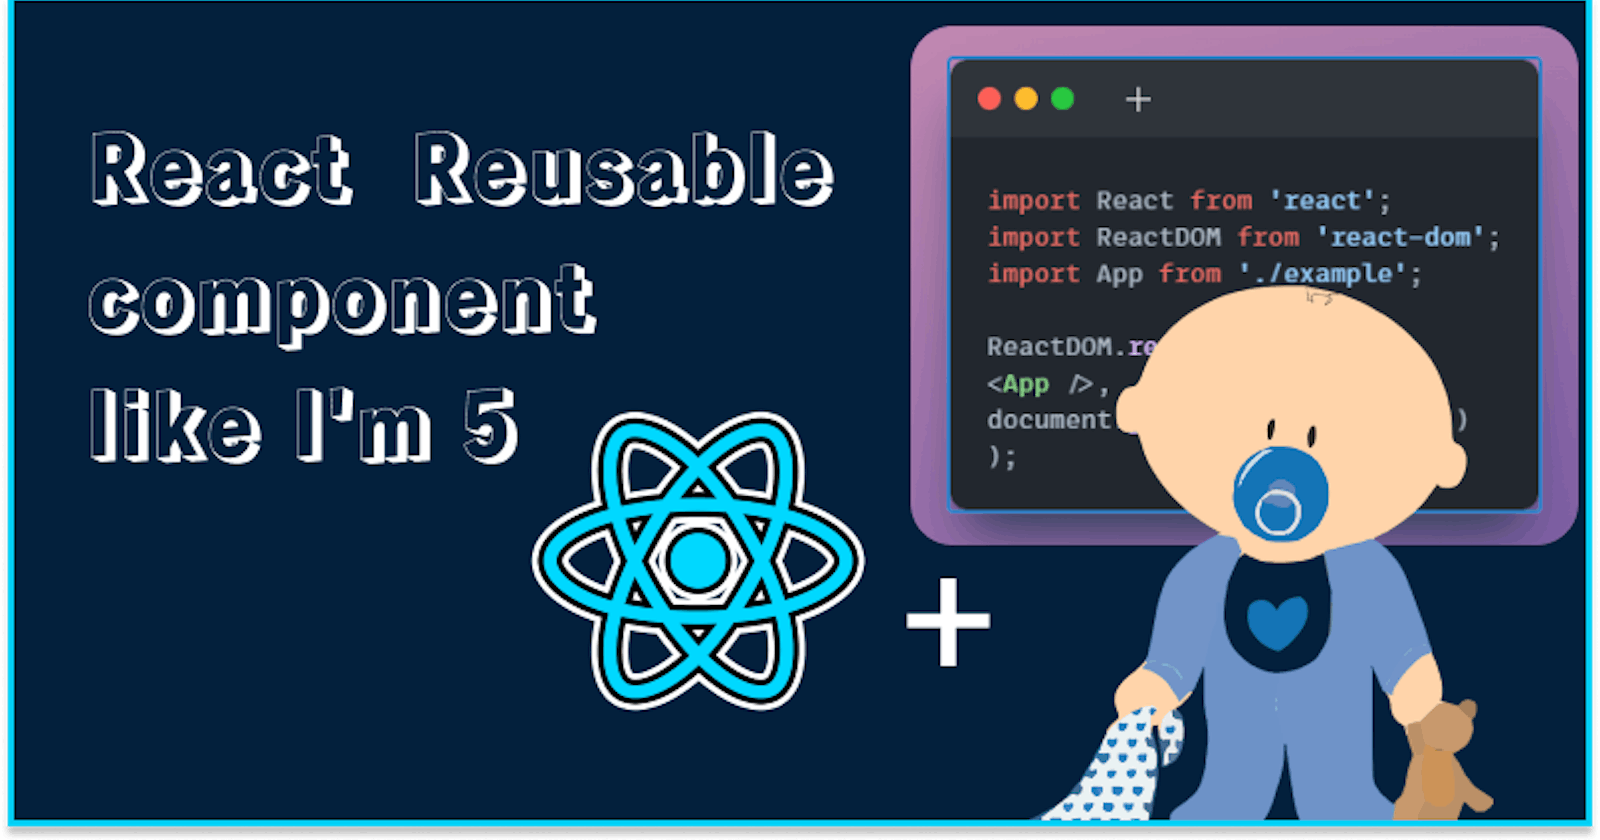 Explain Reusable component in React like I'm 5